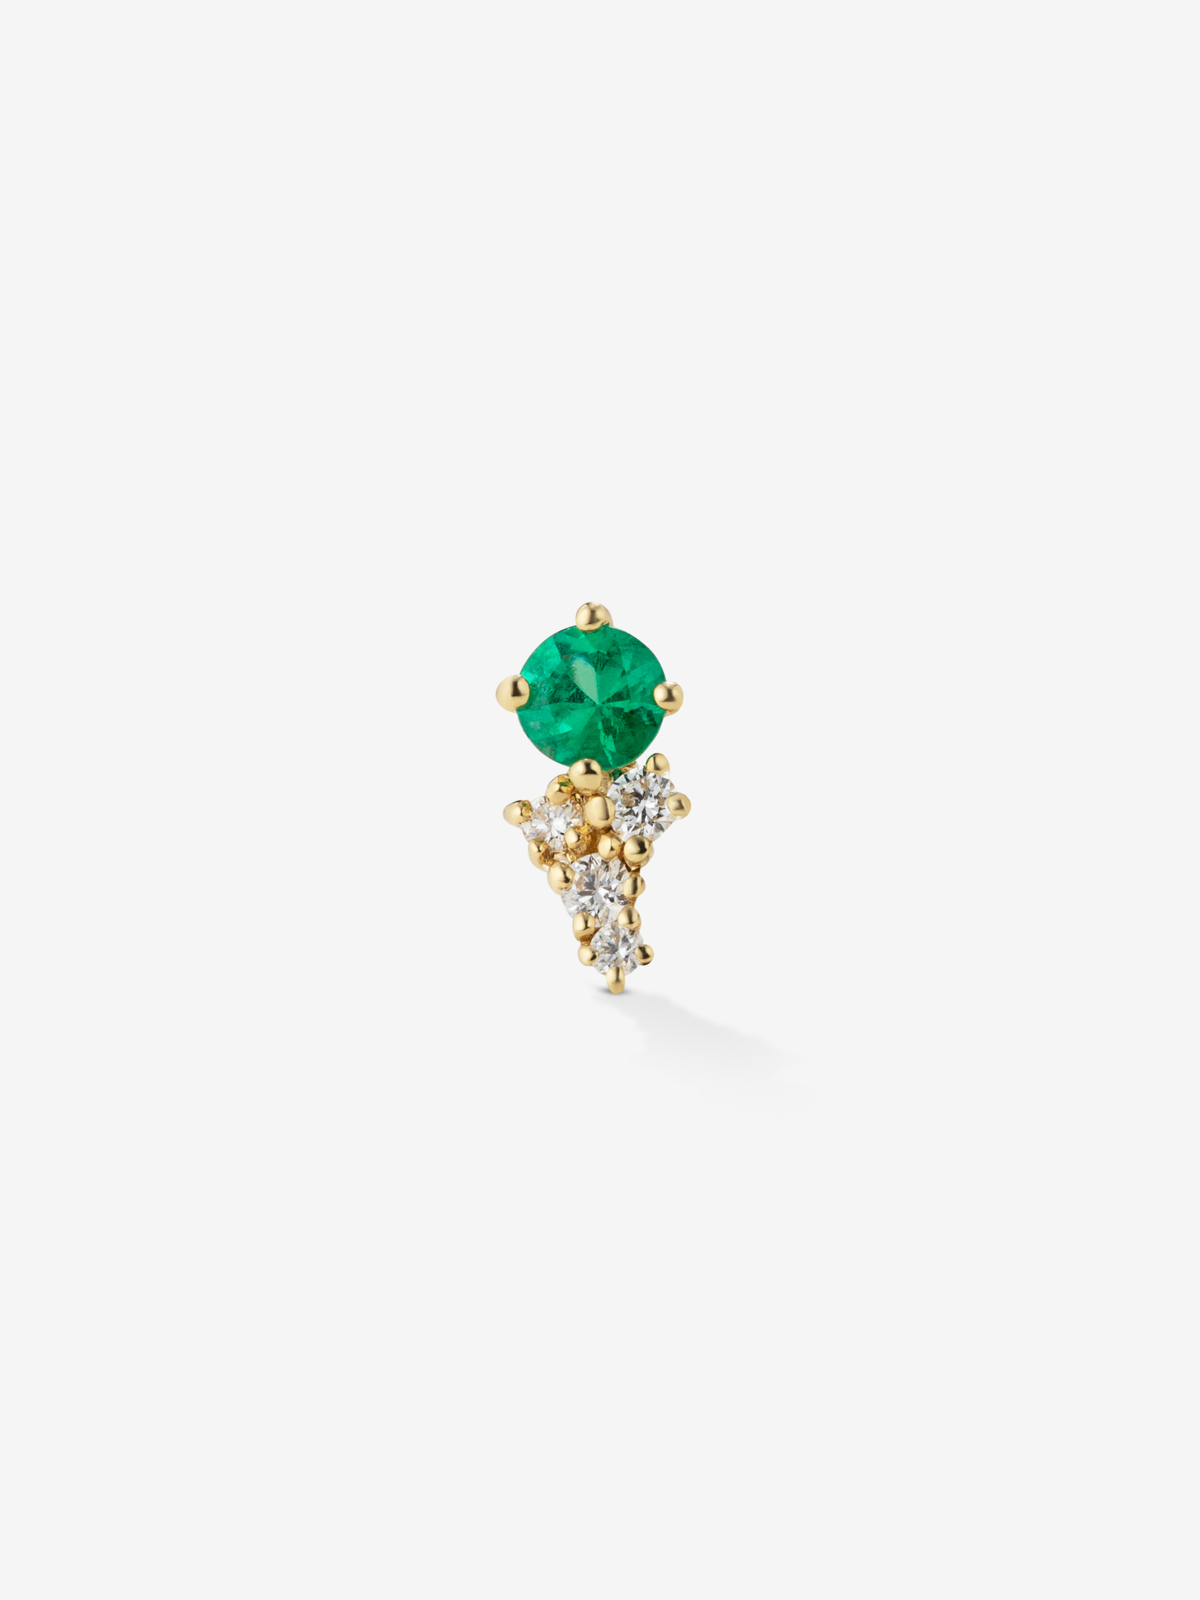 Single left earring in 18K yellow gold with emerald and diamonds.